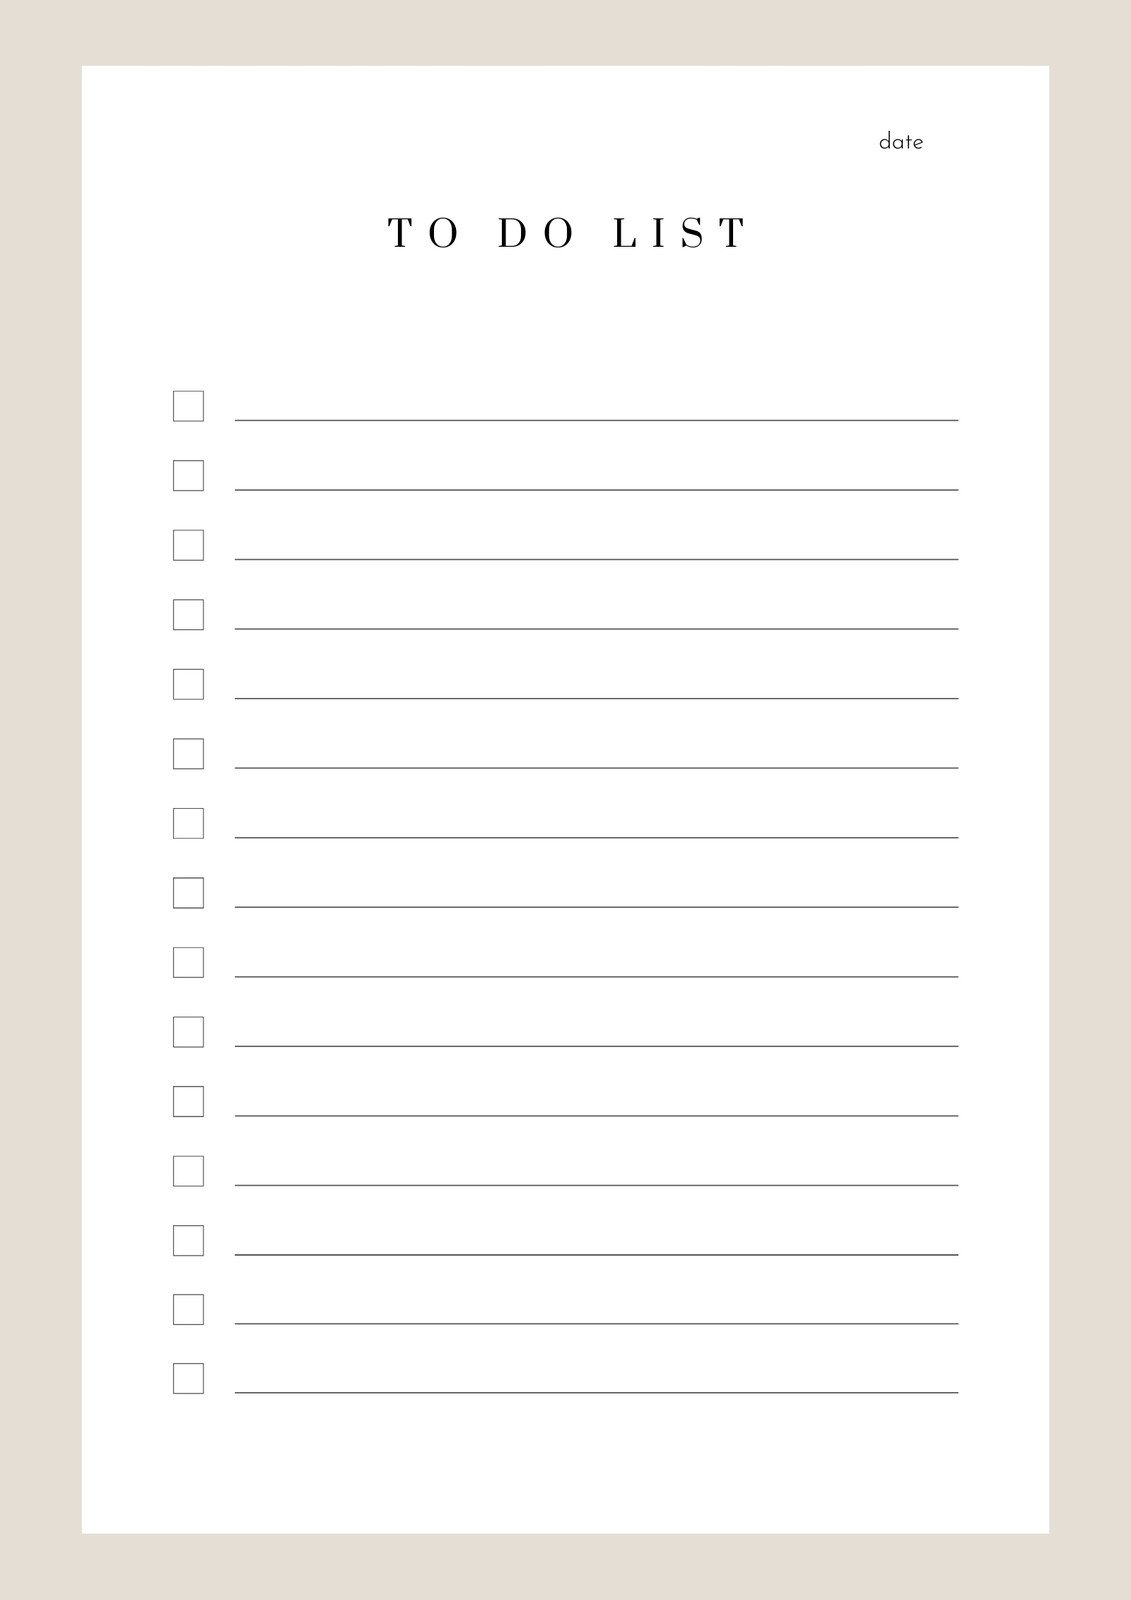 Weekly To Do List Free Printable - Weekly To Do List Free Printable